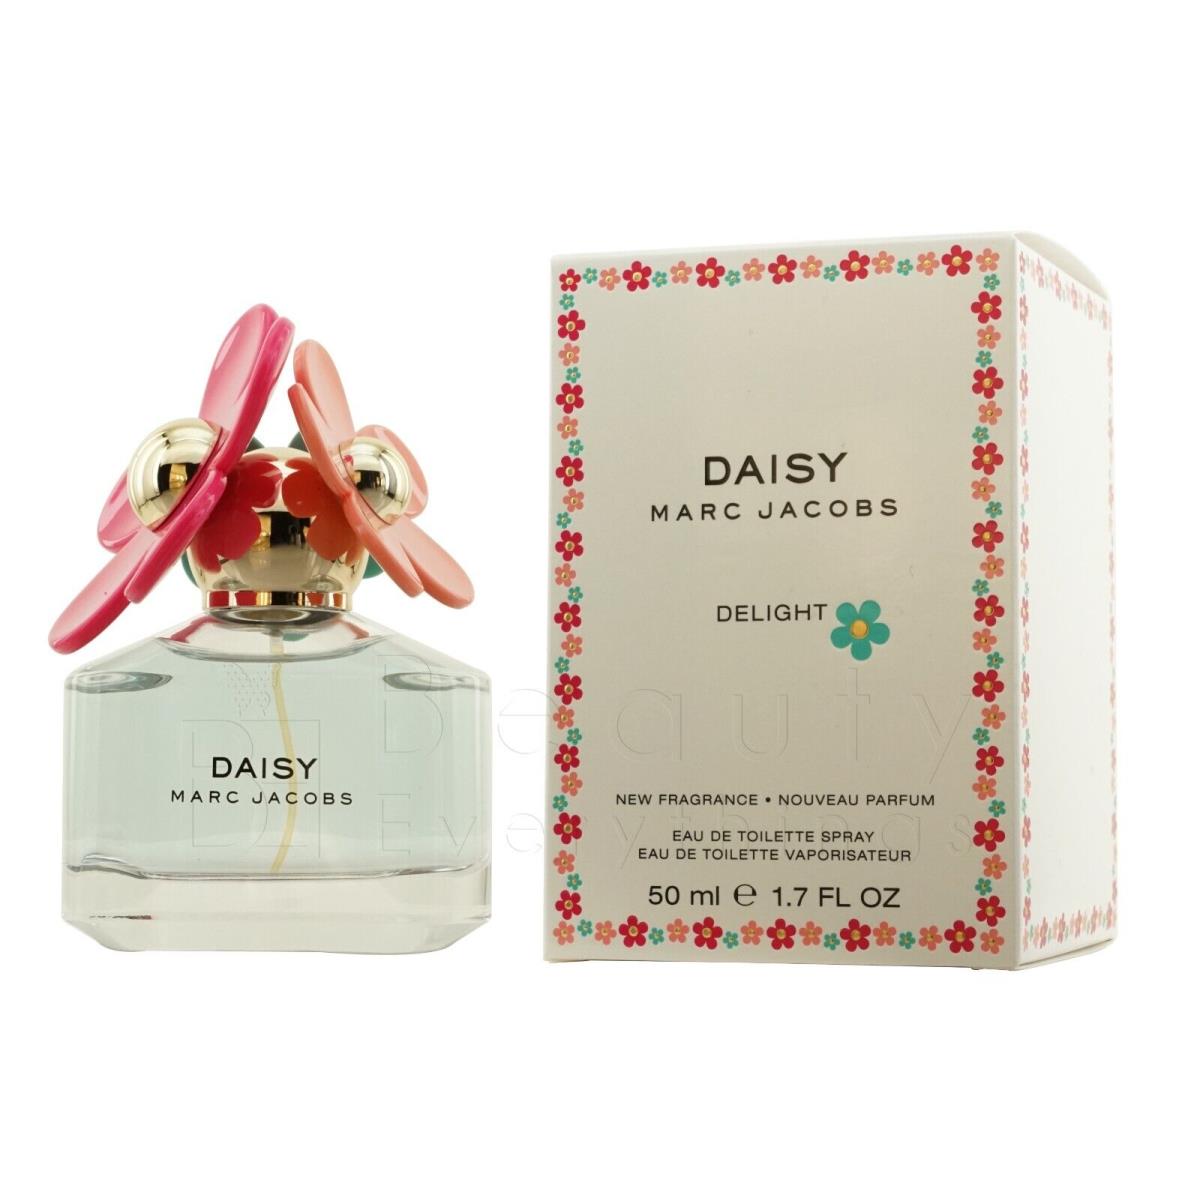 Daisy Delight by Marc Jacobs 1.7oz / 50ml Edt Spray For Women